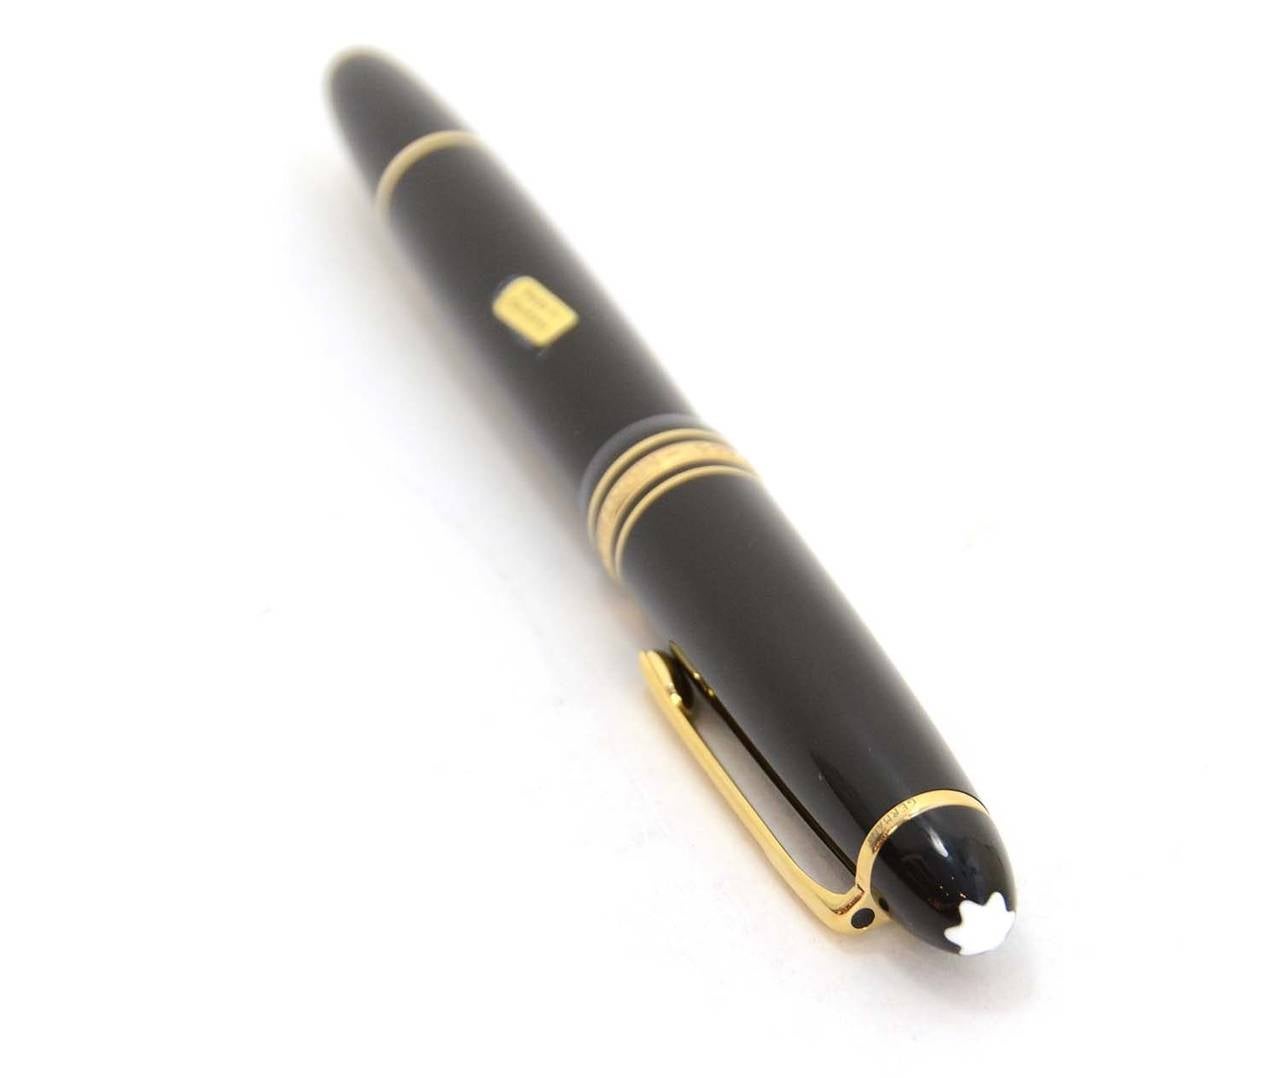 Montblanc Meisterstück LeGrand Document Marker
Features Luminous Green marker

    Made in: Germany
    Color: Black, gold white and silver
    Materials: Resin, gold, and silver
    Closure/opening: Pull off pen cap
    Ident Number: MG